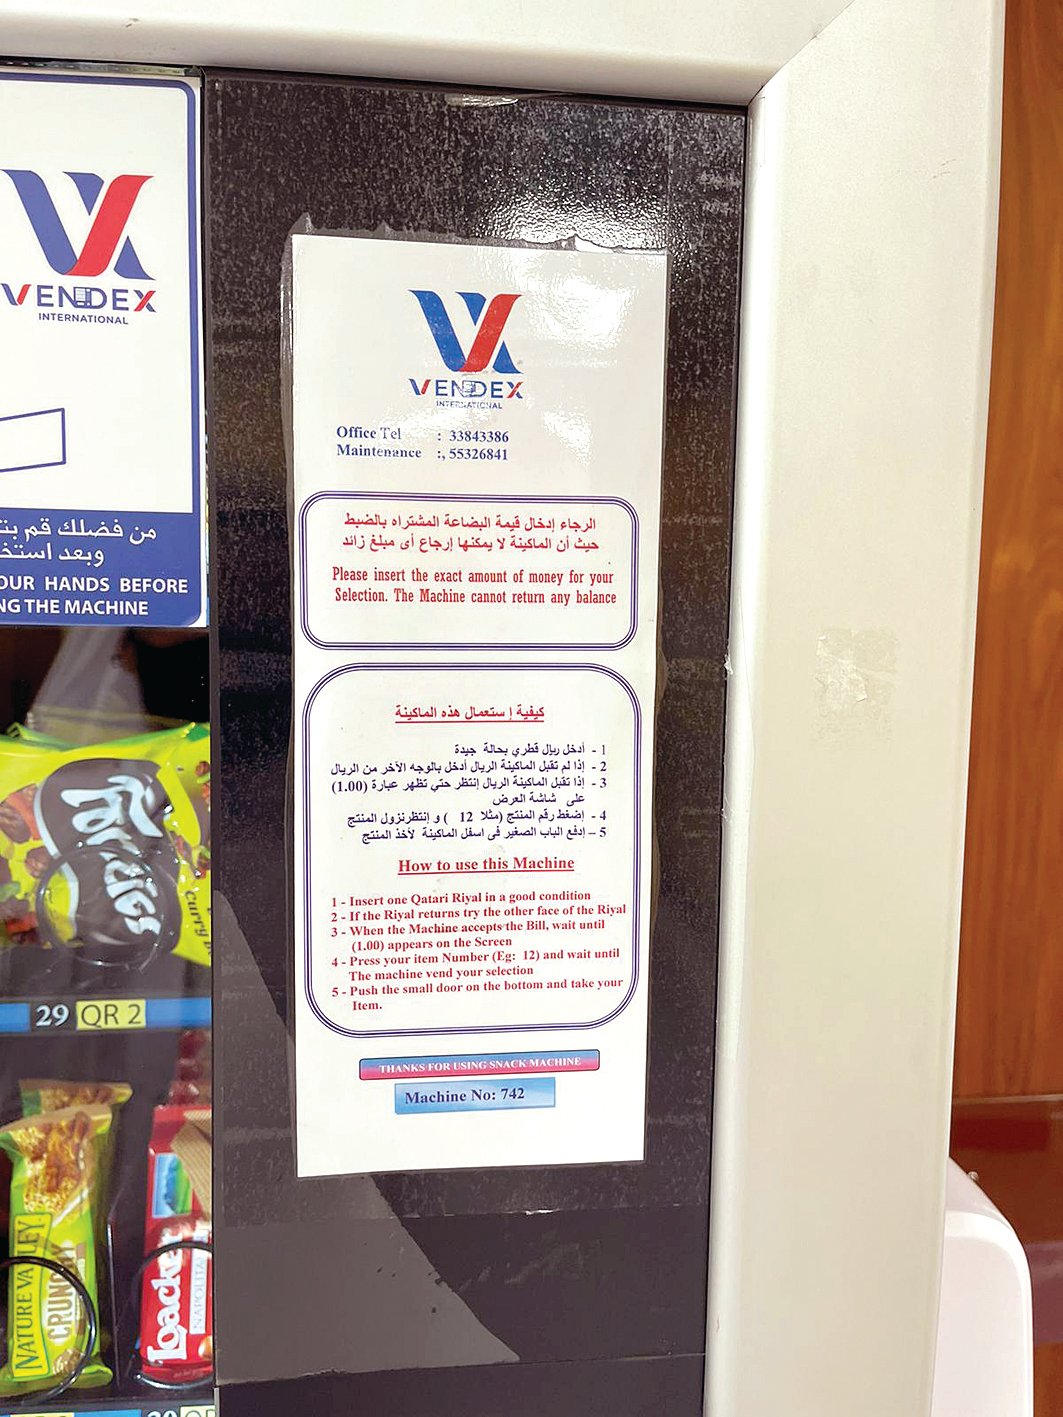 Vending machines in health centers doesn't give back change